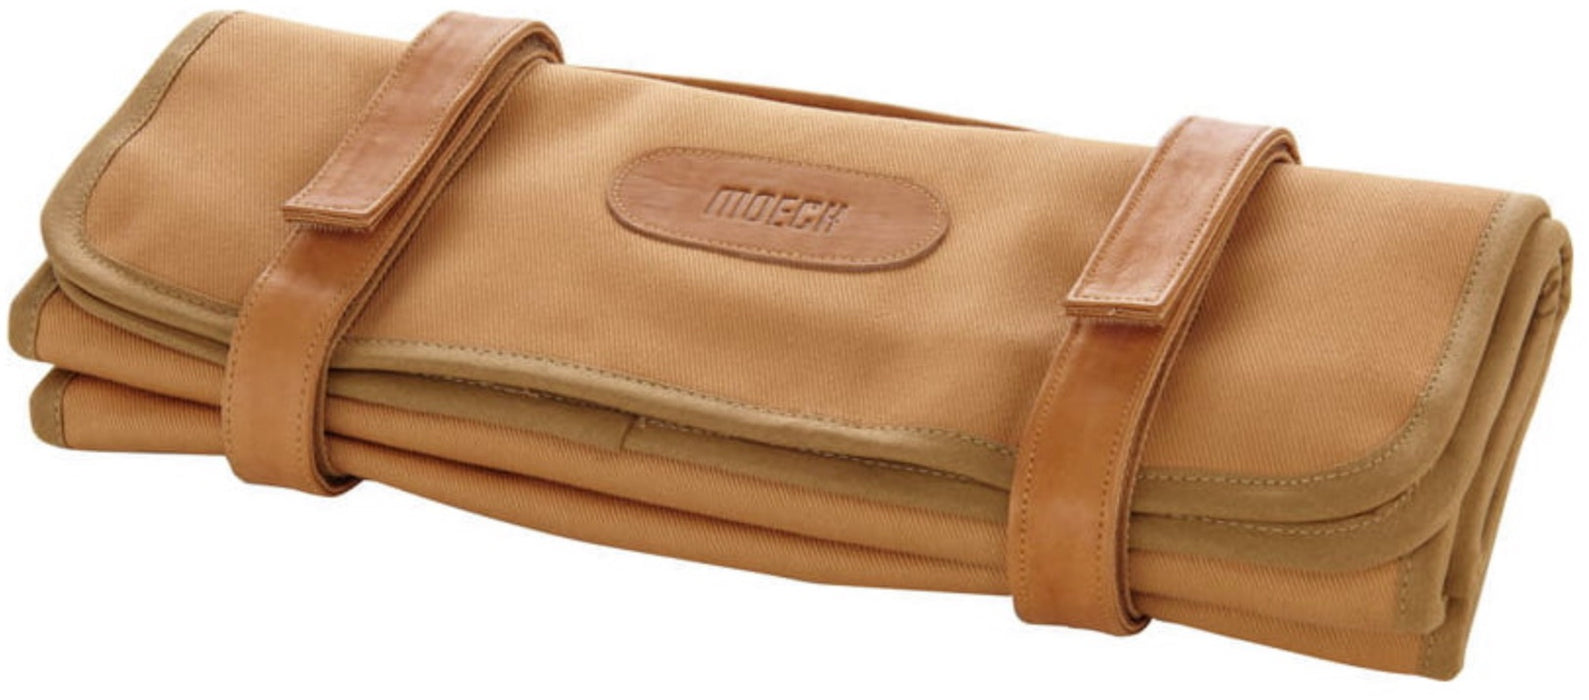 Moeck Z1004 12-Slot Roll Bag for 4-7 Recorders